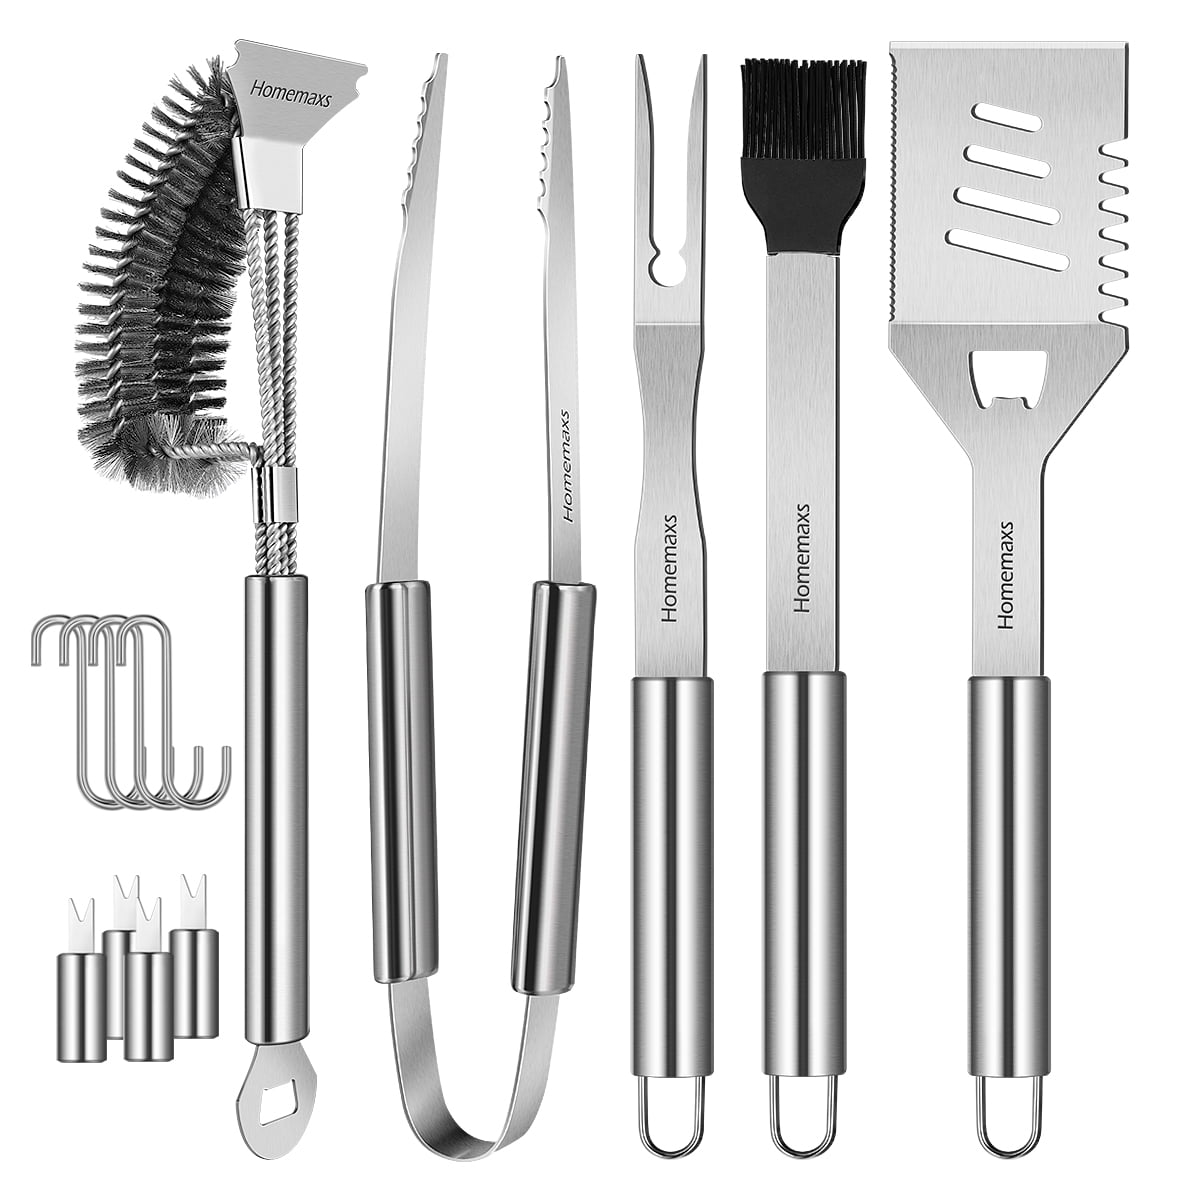 14x BBQ Grill Tool Set Barbecue Outdoor Cooking Backyard StainlessSteel  Cookware